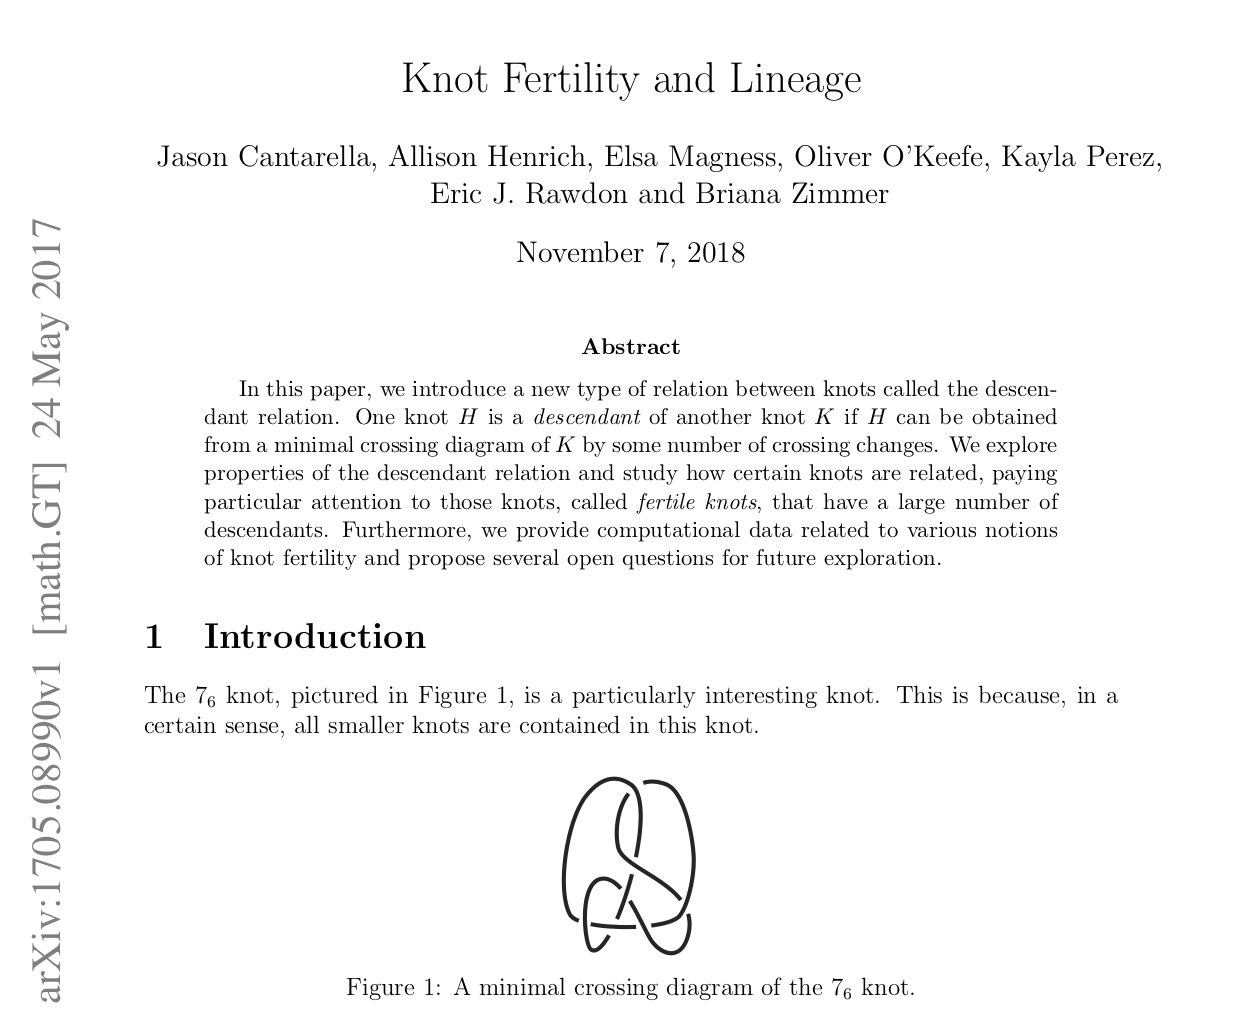 Knot Fertility and Lineage cover page